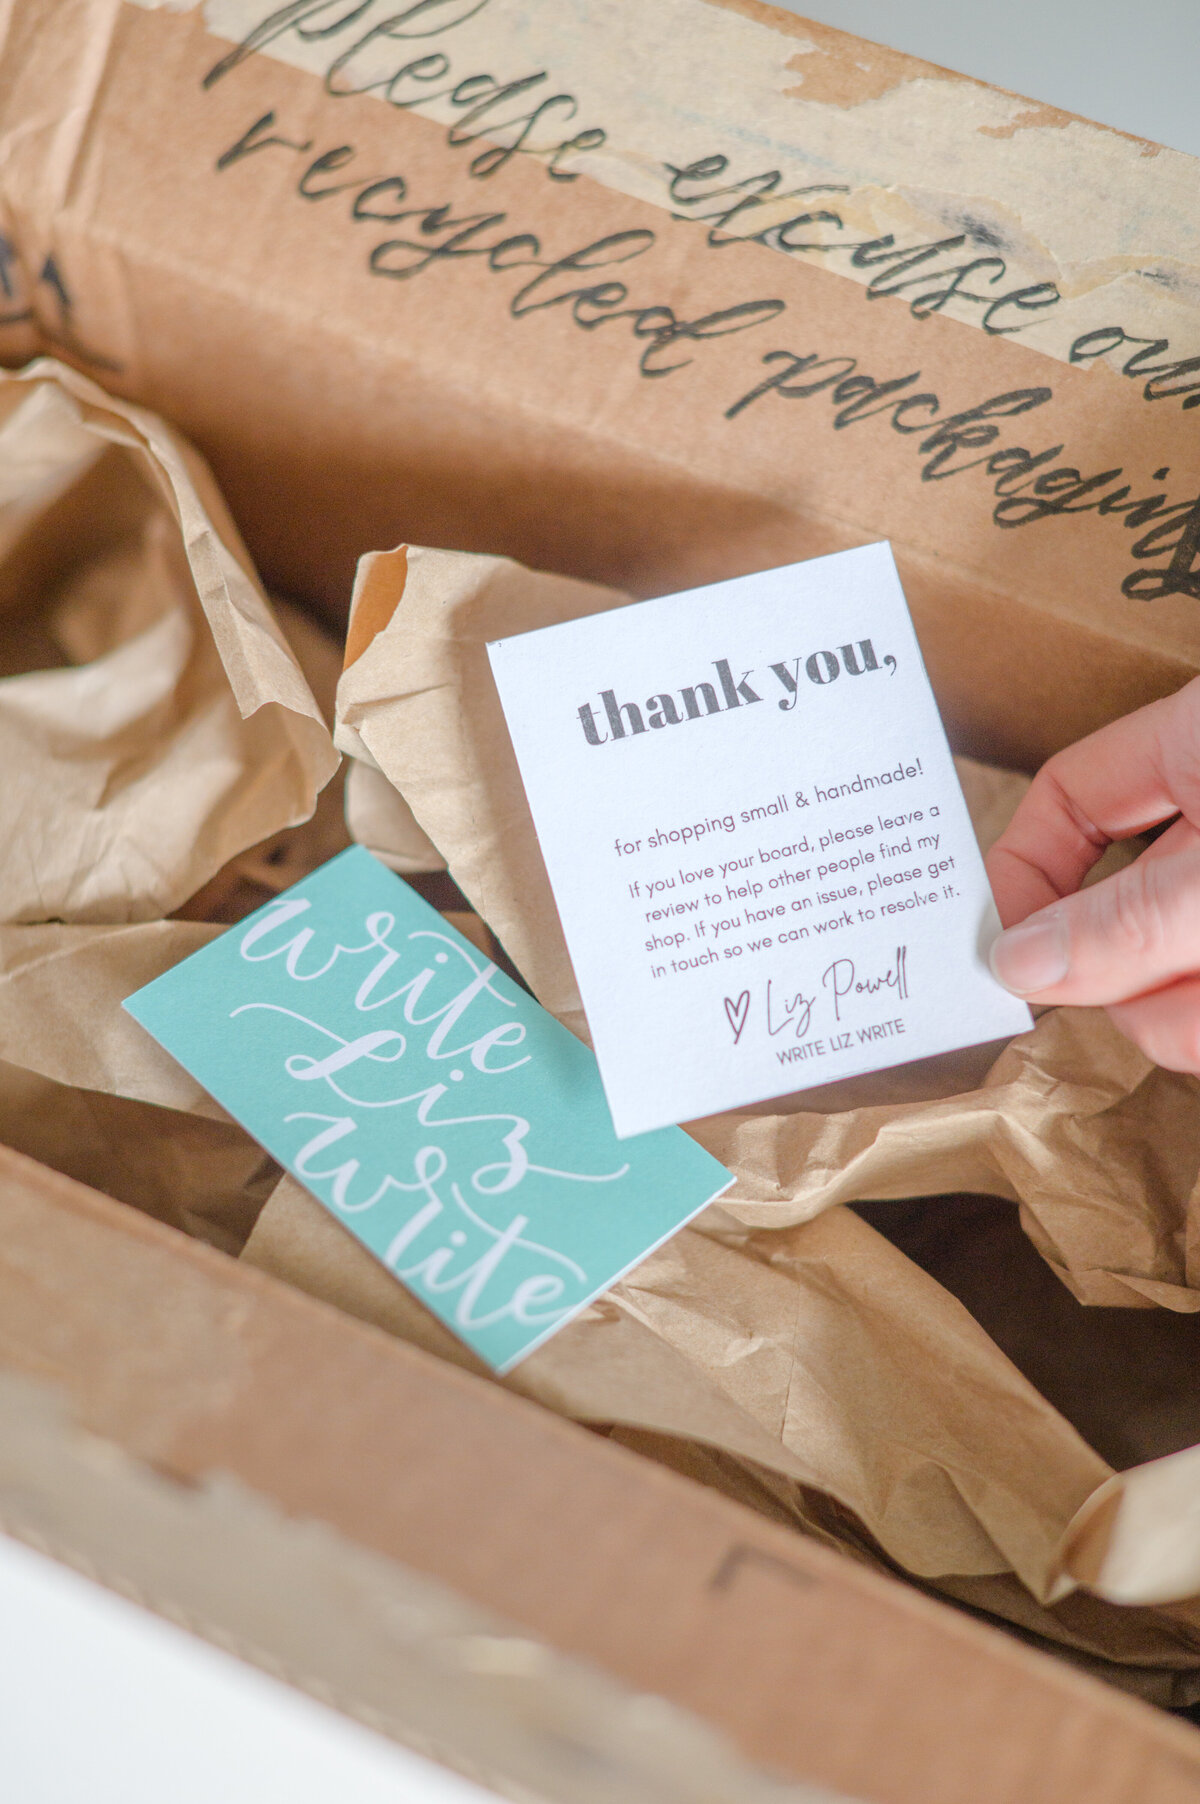 This custom personal brand session features an incredibly talented hand letterer located in Northern Virginia. We walked through her entire process from start to finish, featuring so many behind the scenes looks into her business.